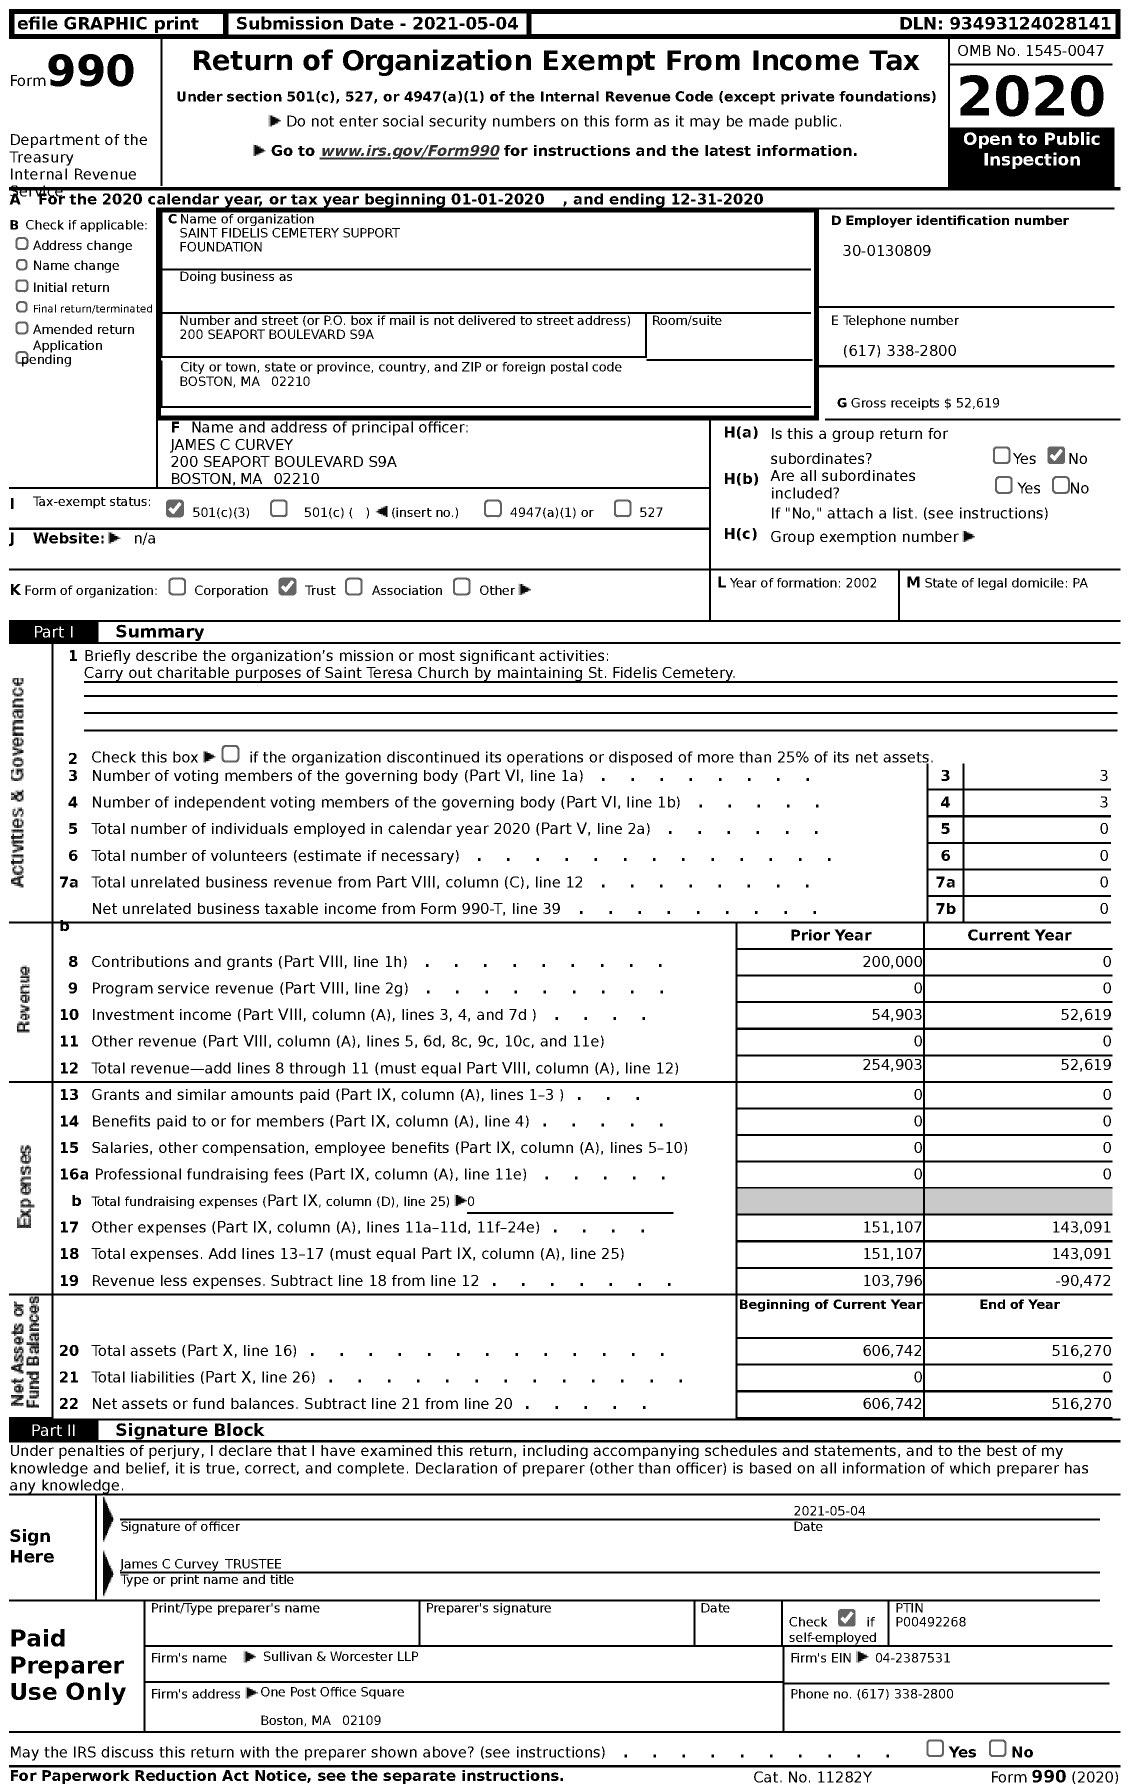 Image of first page of 2020 Form 990 for Saint Fidelis Cemetery Support Foundation